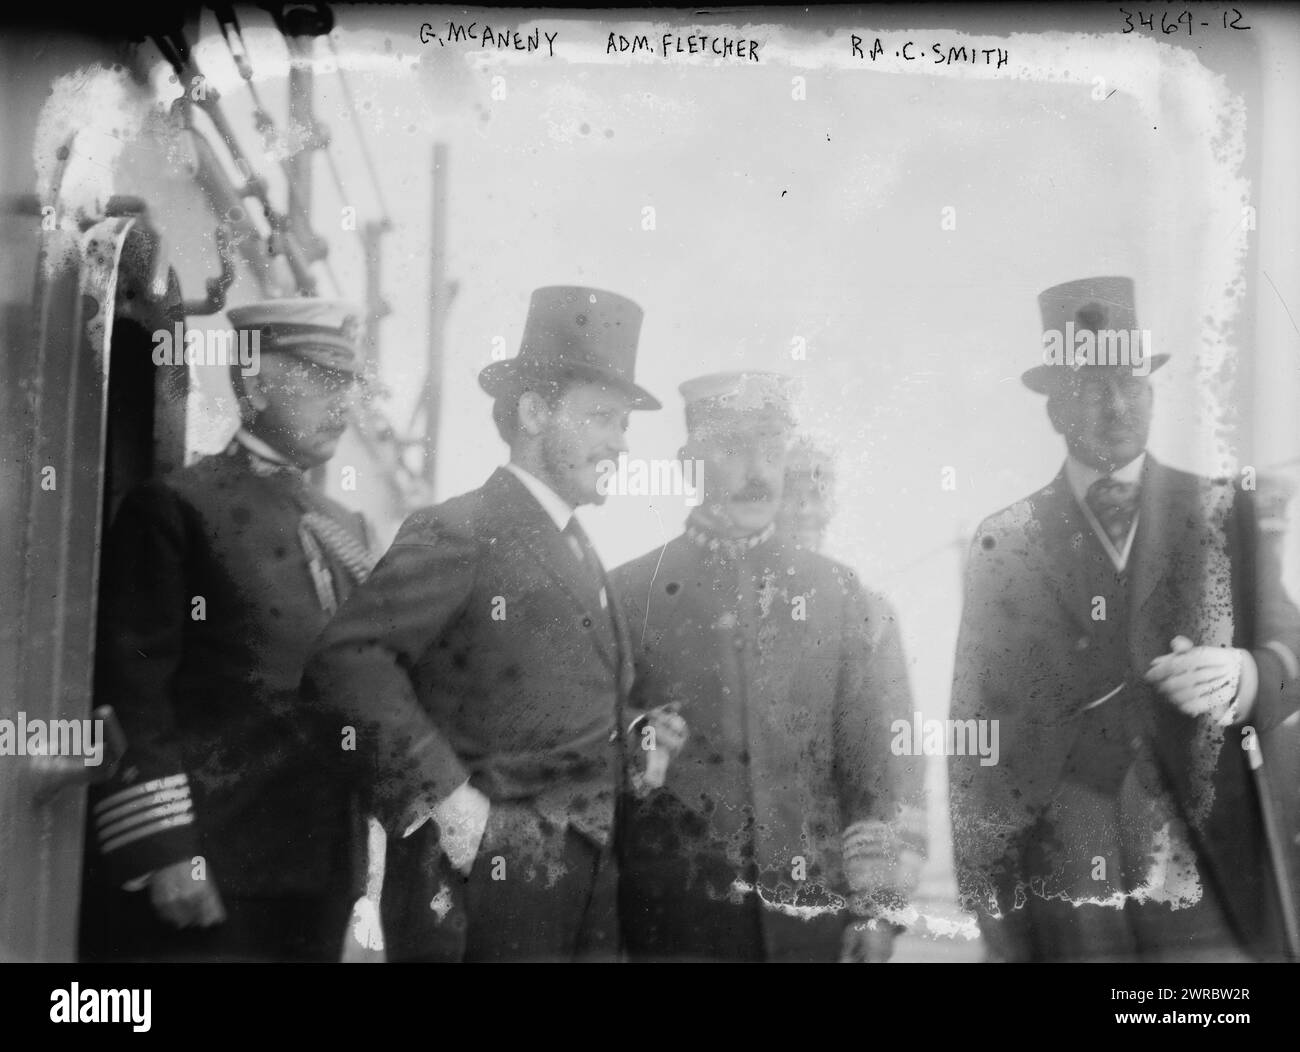 G. McAneny, Adm. Fletcher, R.A.C. Smith, Photograph shows U.S. Navy Admiral Frank Friday Fletcher (1855-1928), Commander of the Atlantic fleet; Robert A.C. Smith (1857-1933), Commissioner of Docks in New York City and Acting Mayor of New York George Francis McAneny (1869-1953). The men were probably gathered on the USS Wyoming for the Naval review of May, 1915., 1915 May, Glass negatives, 1 negative: glass Stock Photo